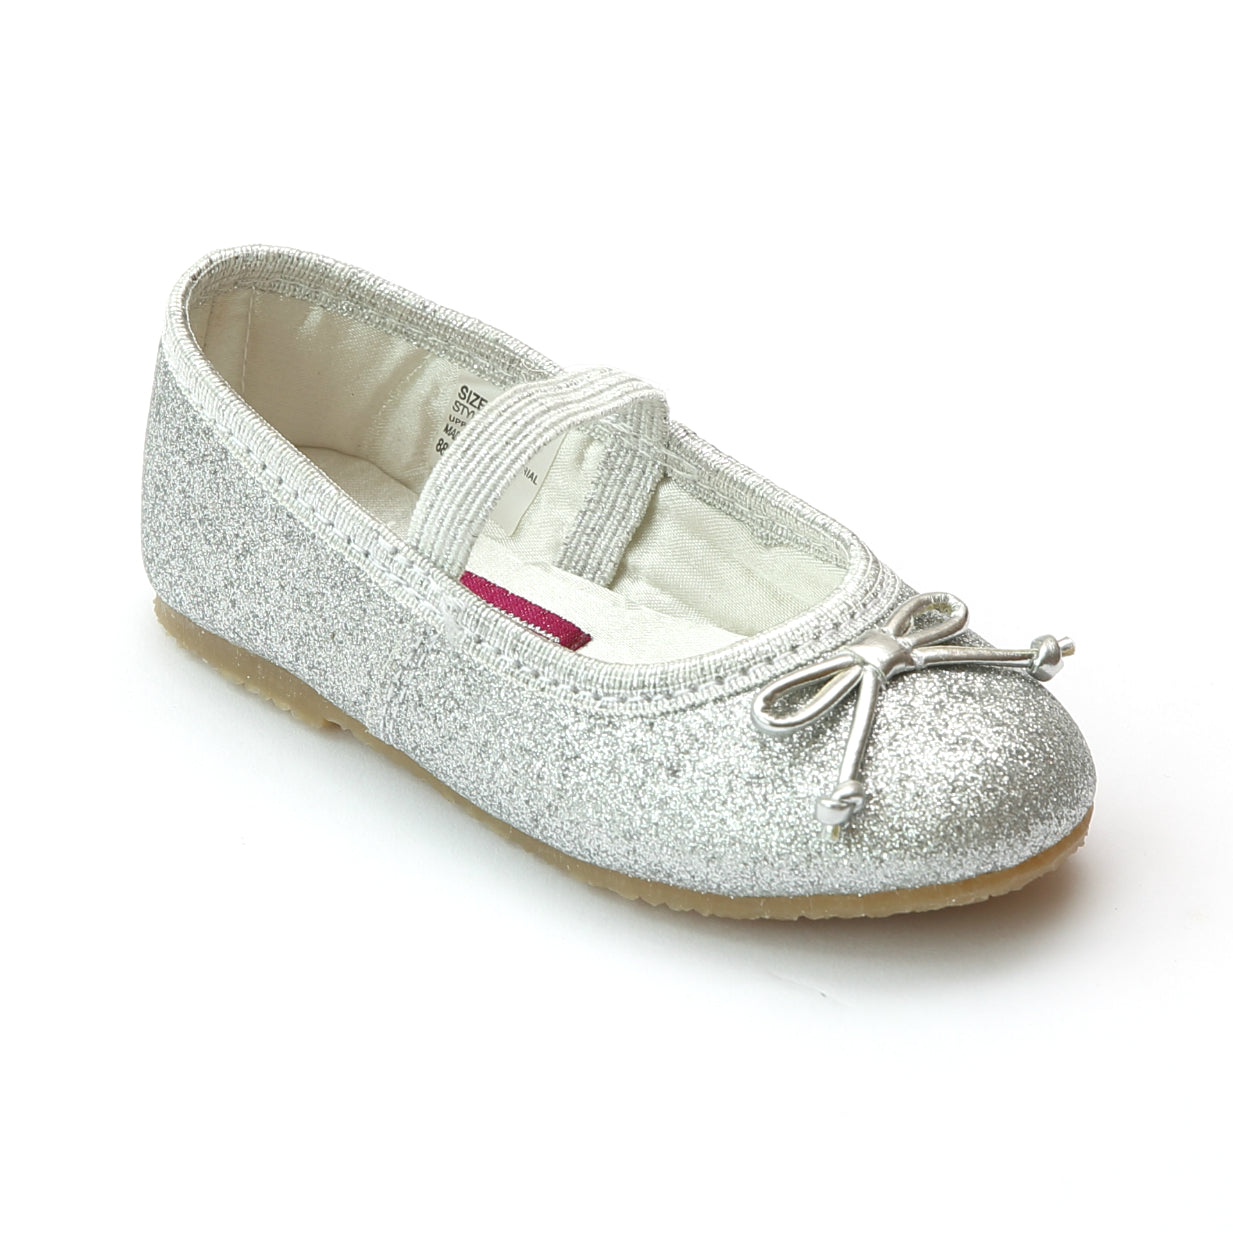 L'Amour Shoes Girls Glitter Silver Classic Ballet Flats with Bow ...